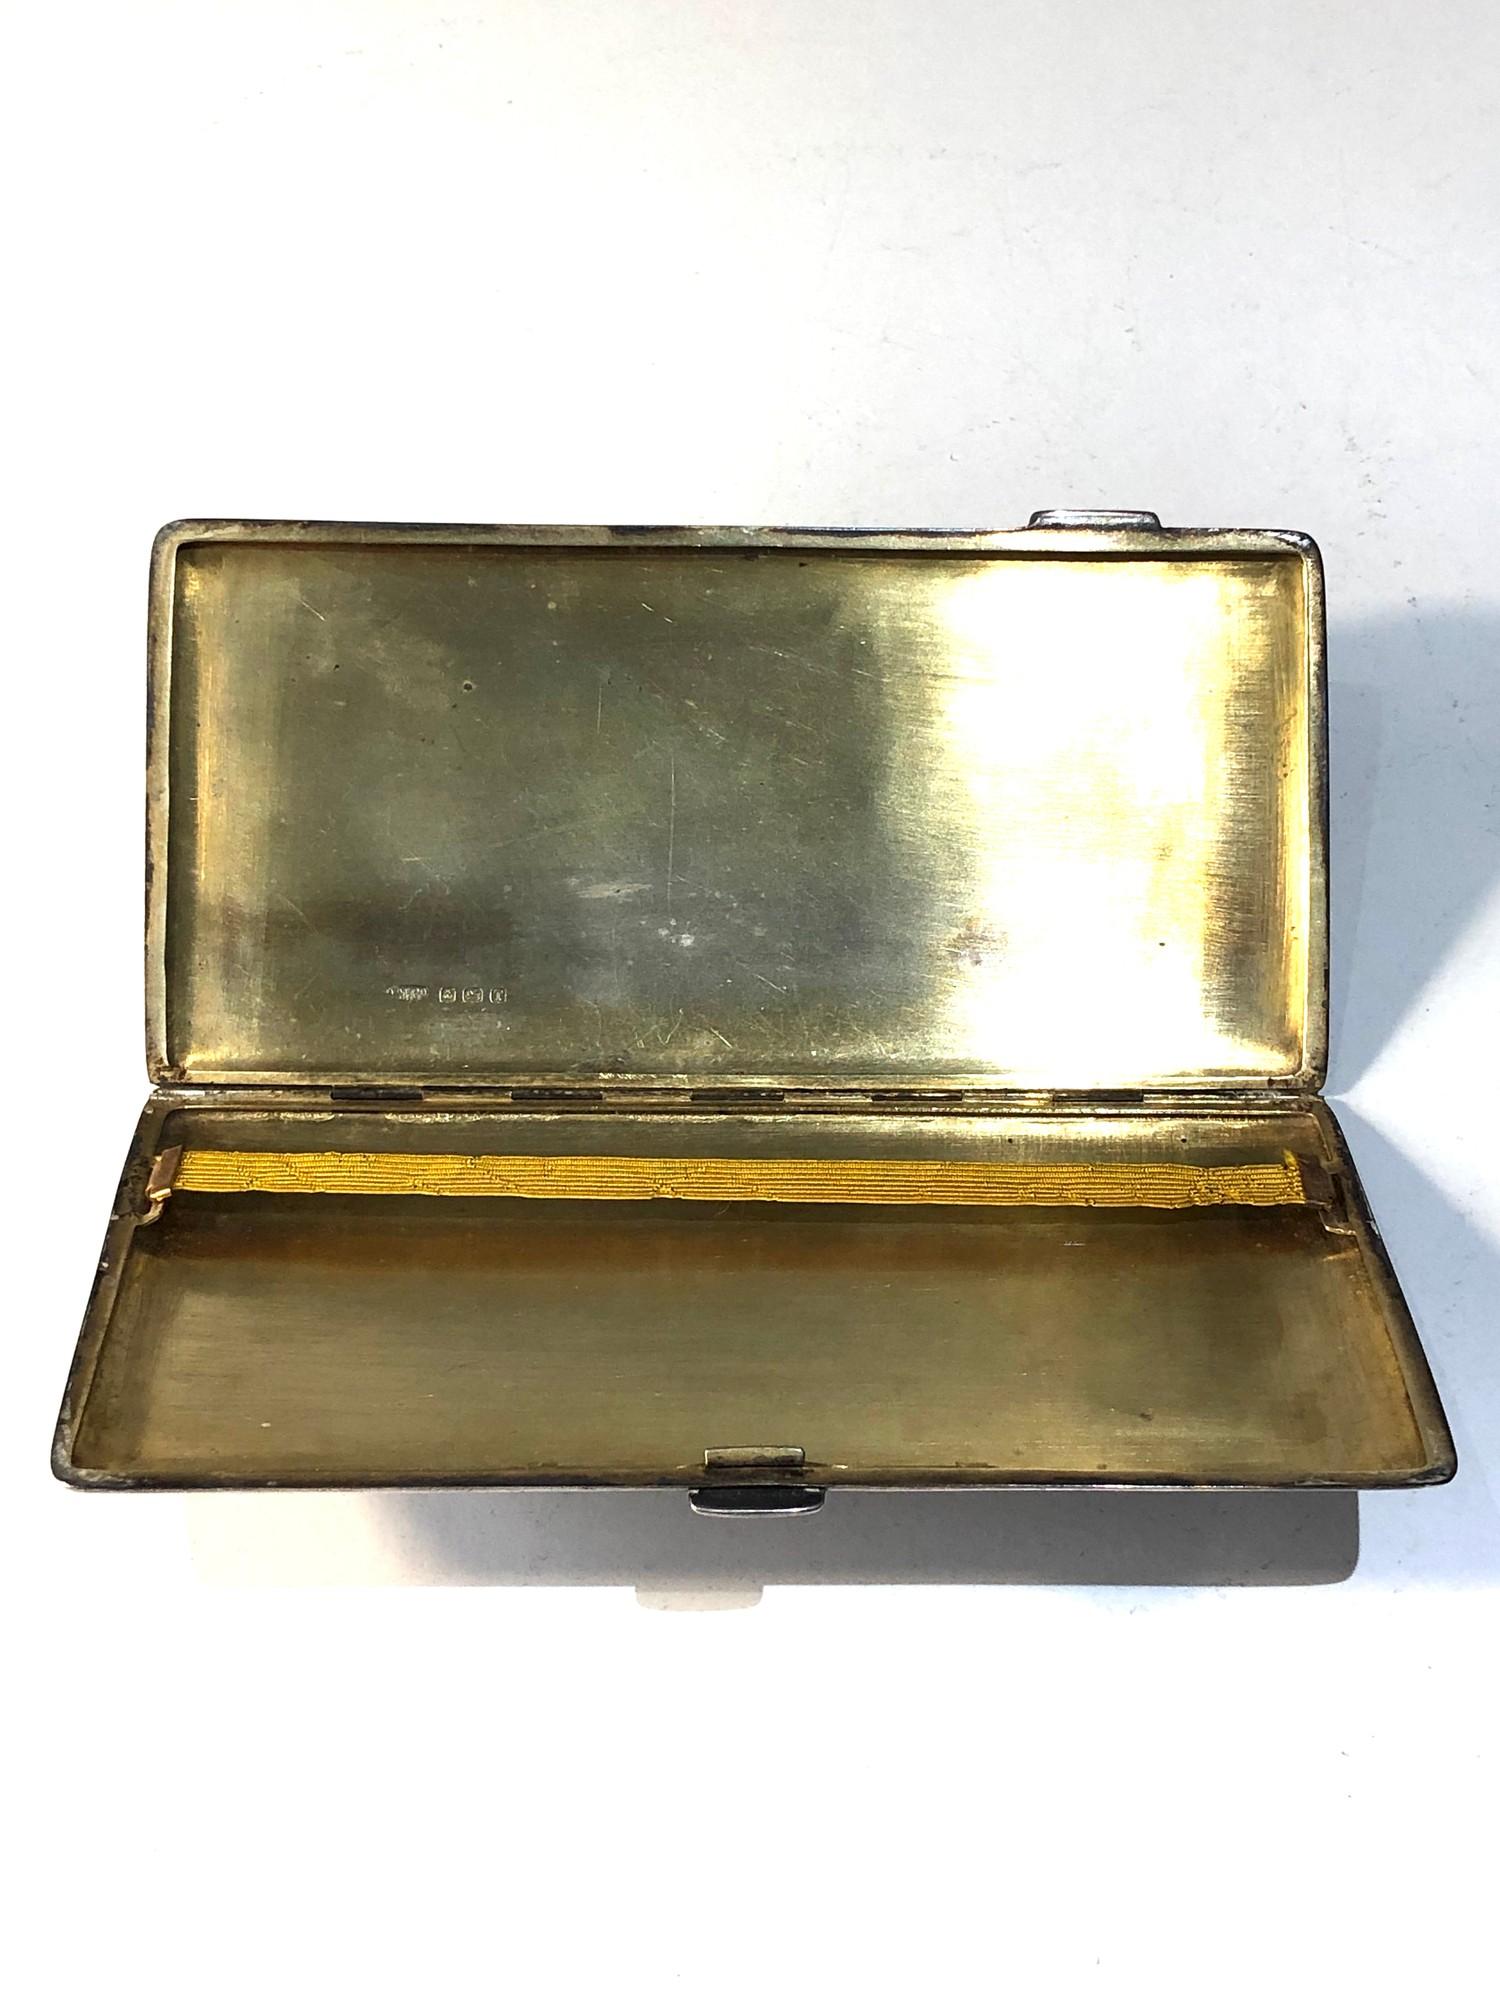 Large heavy silver engine turned cigarette case weight 250g - Image 3 of 3